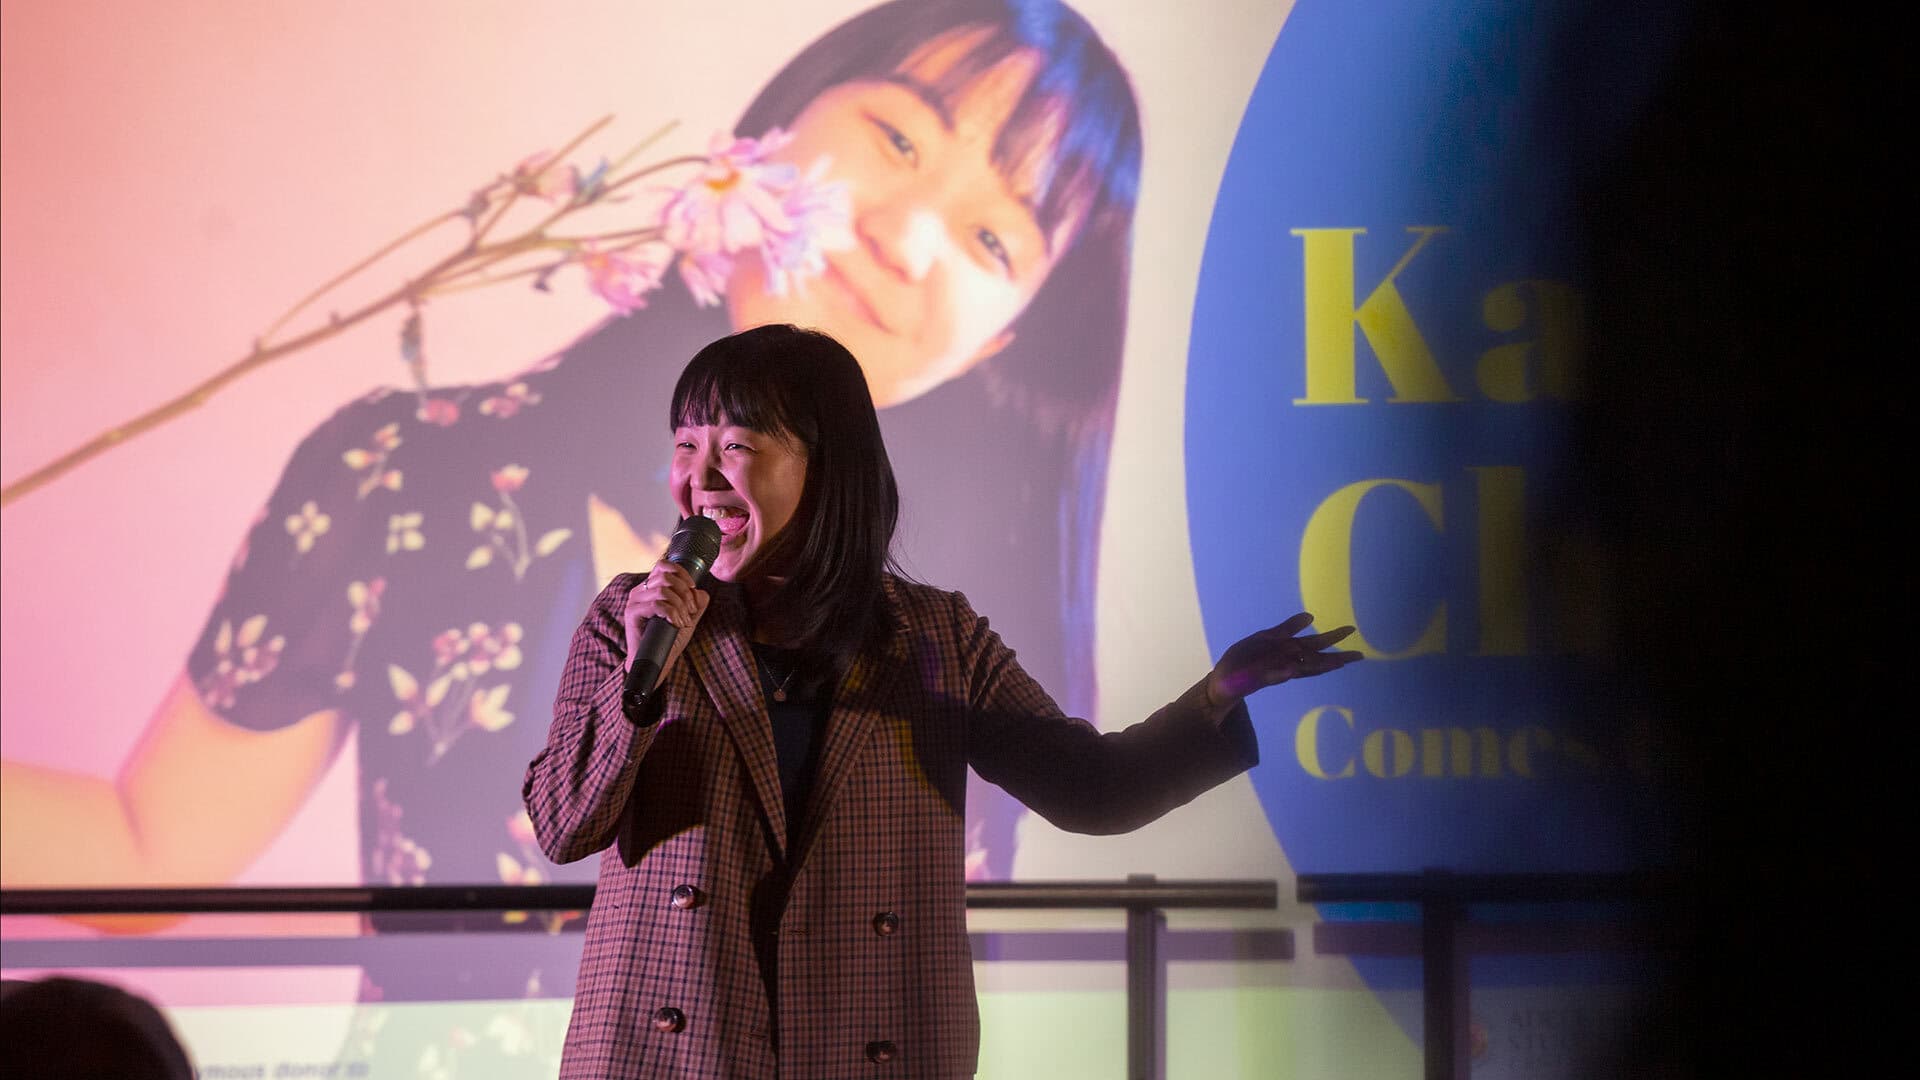 Comedian and writer Karen Chee peforms Friday at the Stamp Student Union to help mark the 20th anniversary of UMD's Asian American Studies program.